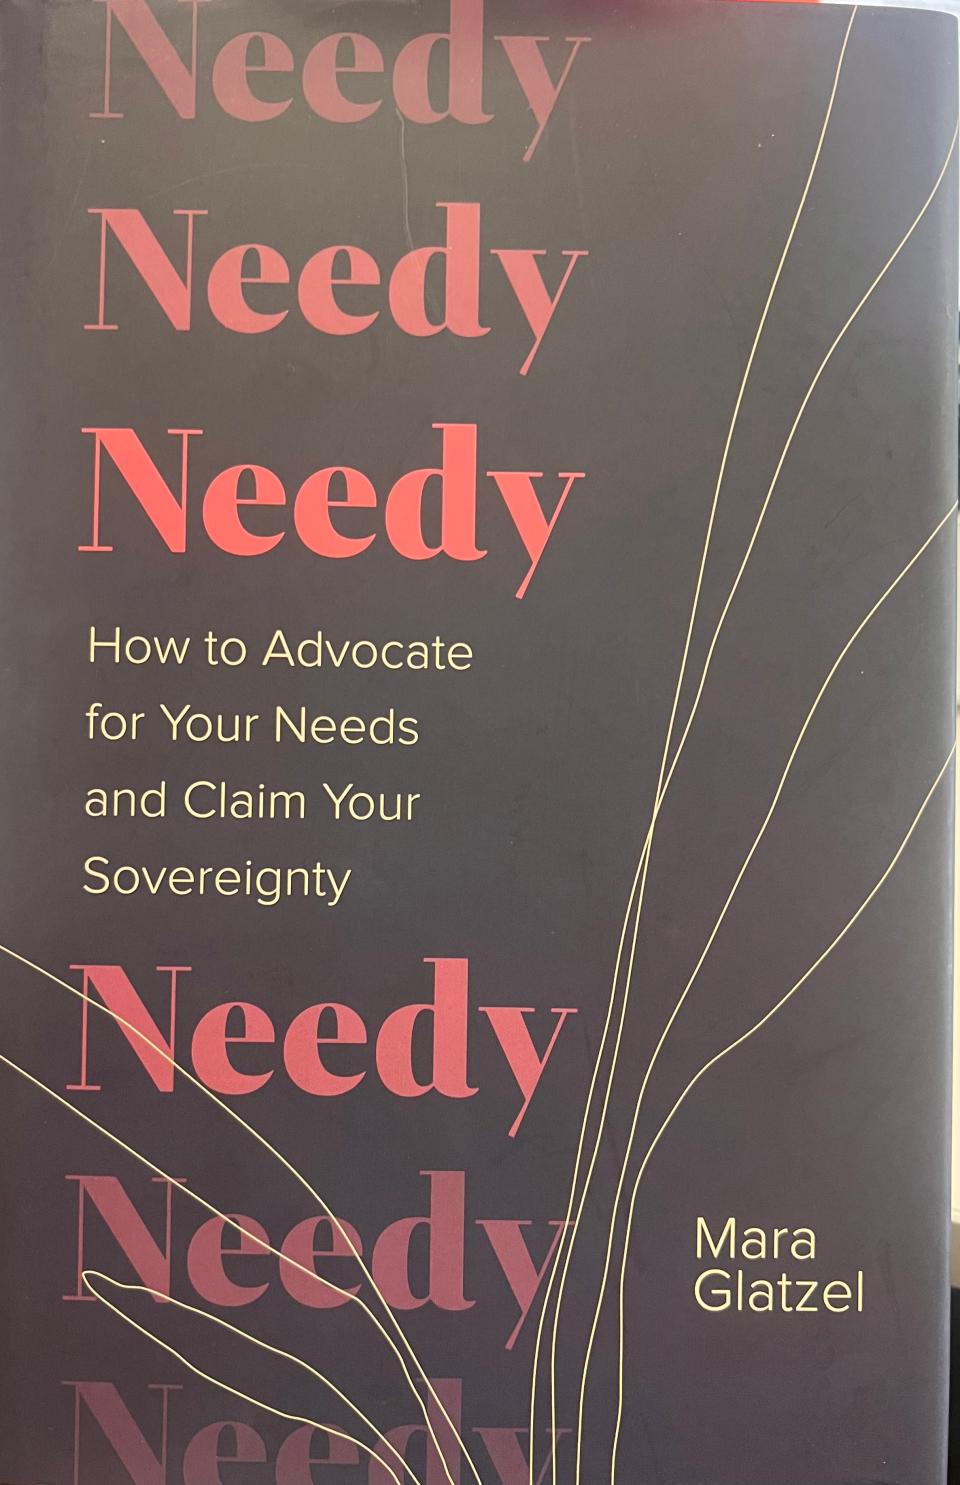 Mara Glatzel's book "Needy: How to Advocate for Your Needs and Claim Your Sovereignty."